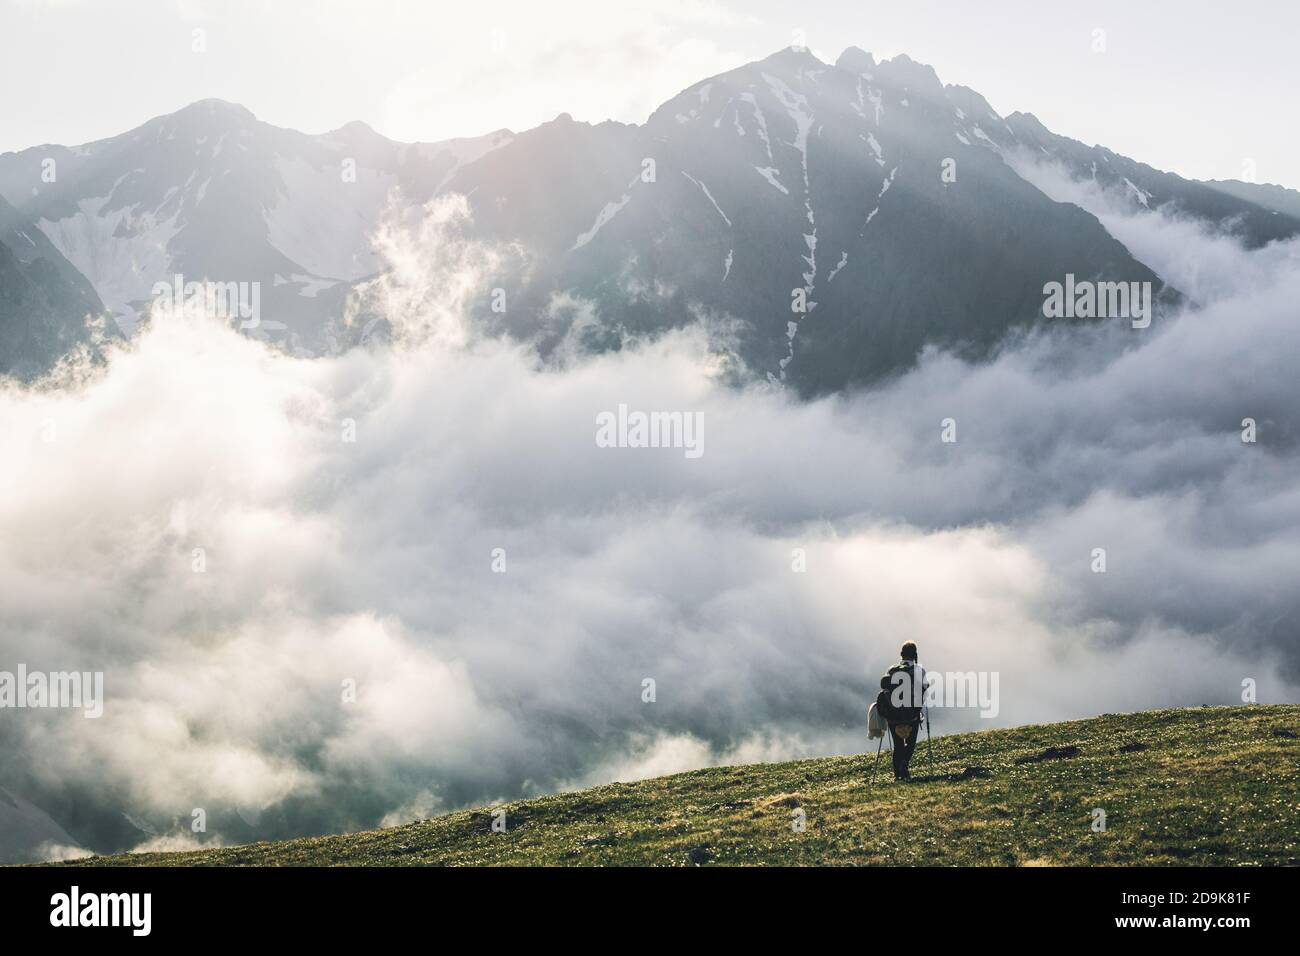 Woman hiking at sunset mountains with heavy backpack Travel Lifestyle wanderlust adventure concept summer vacations outdoor alone into the wild Stock Photo